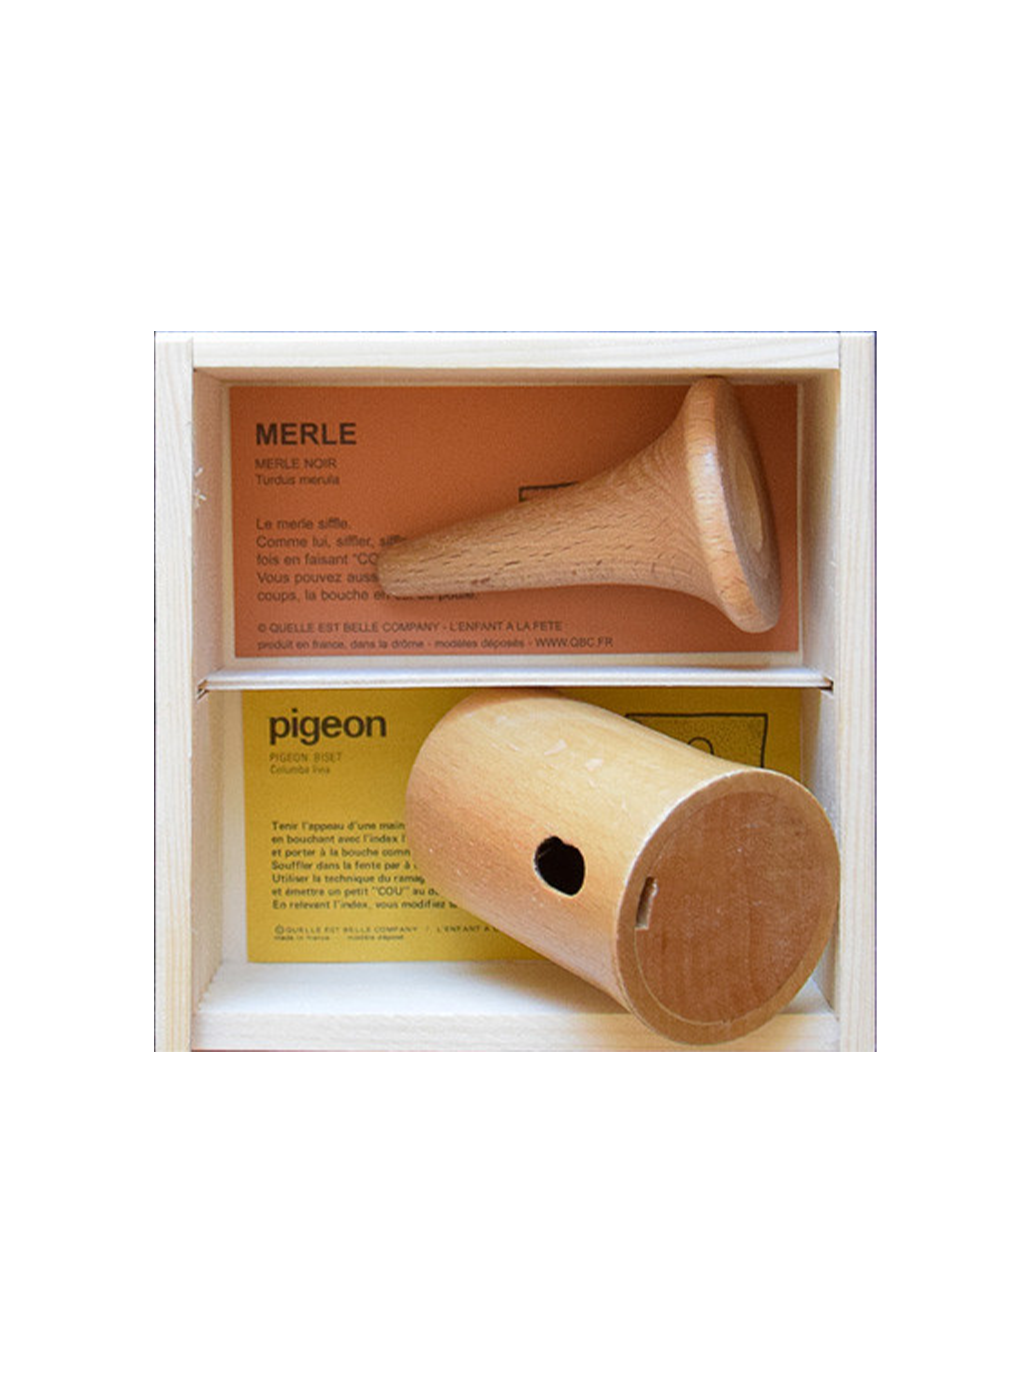 set of wooden instruments to imitate the sounds of birds